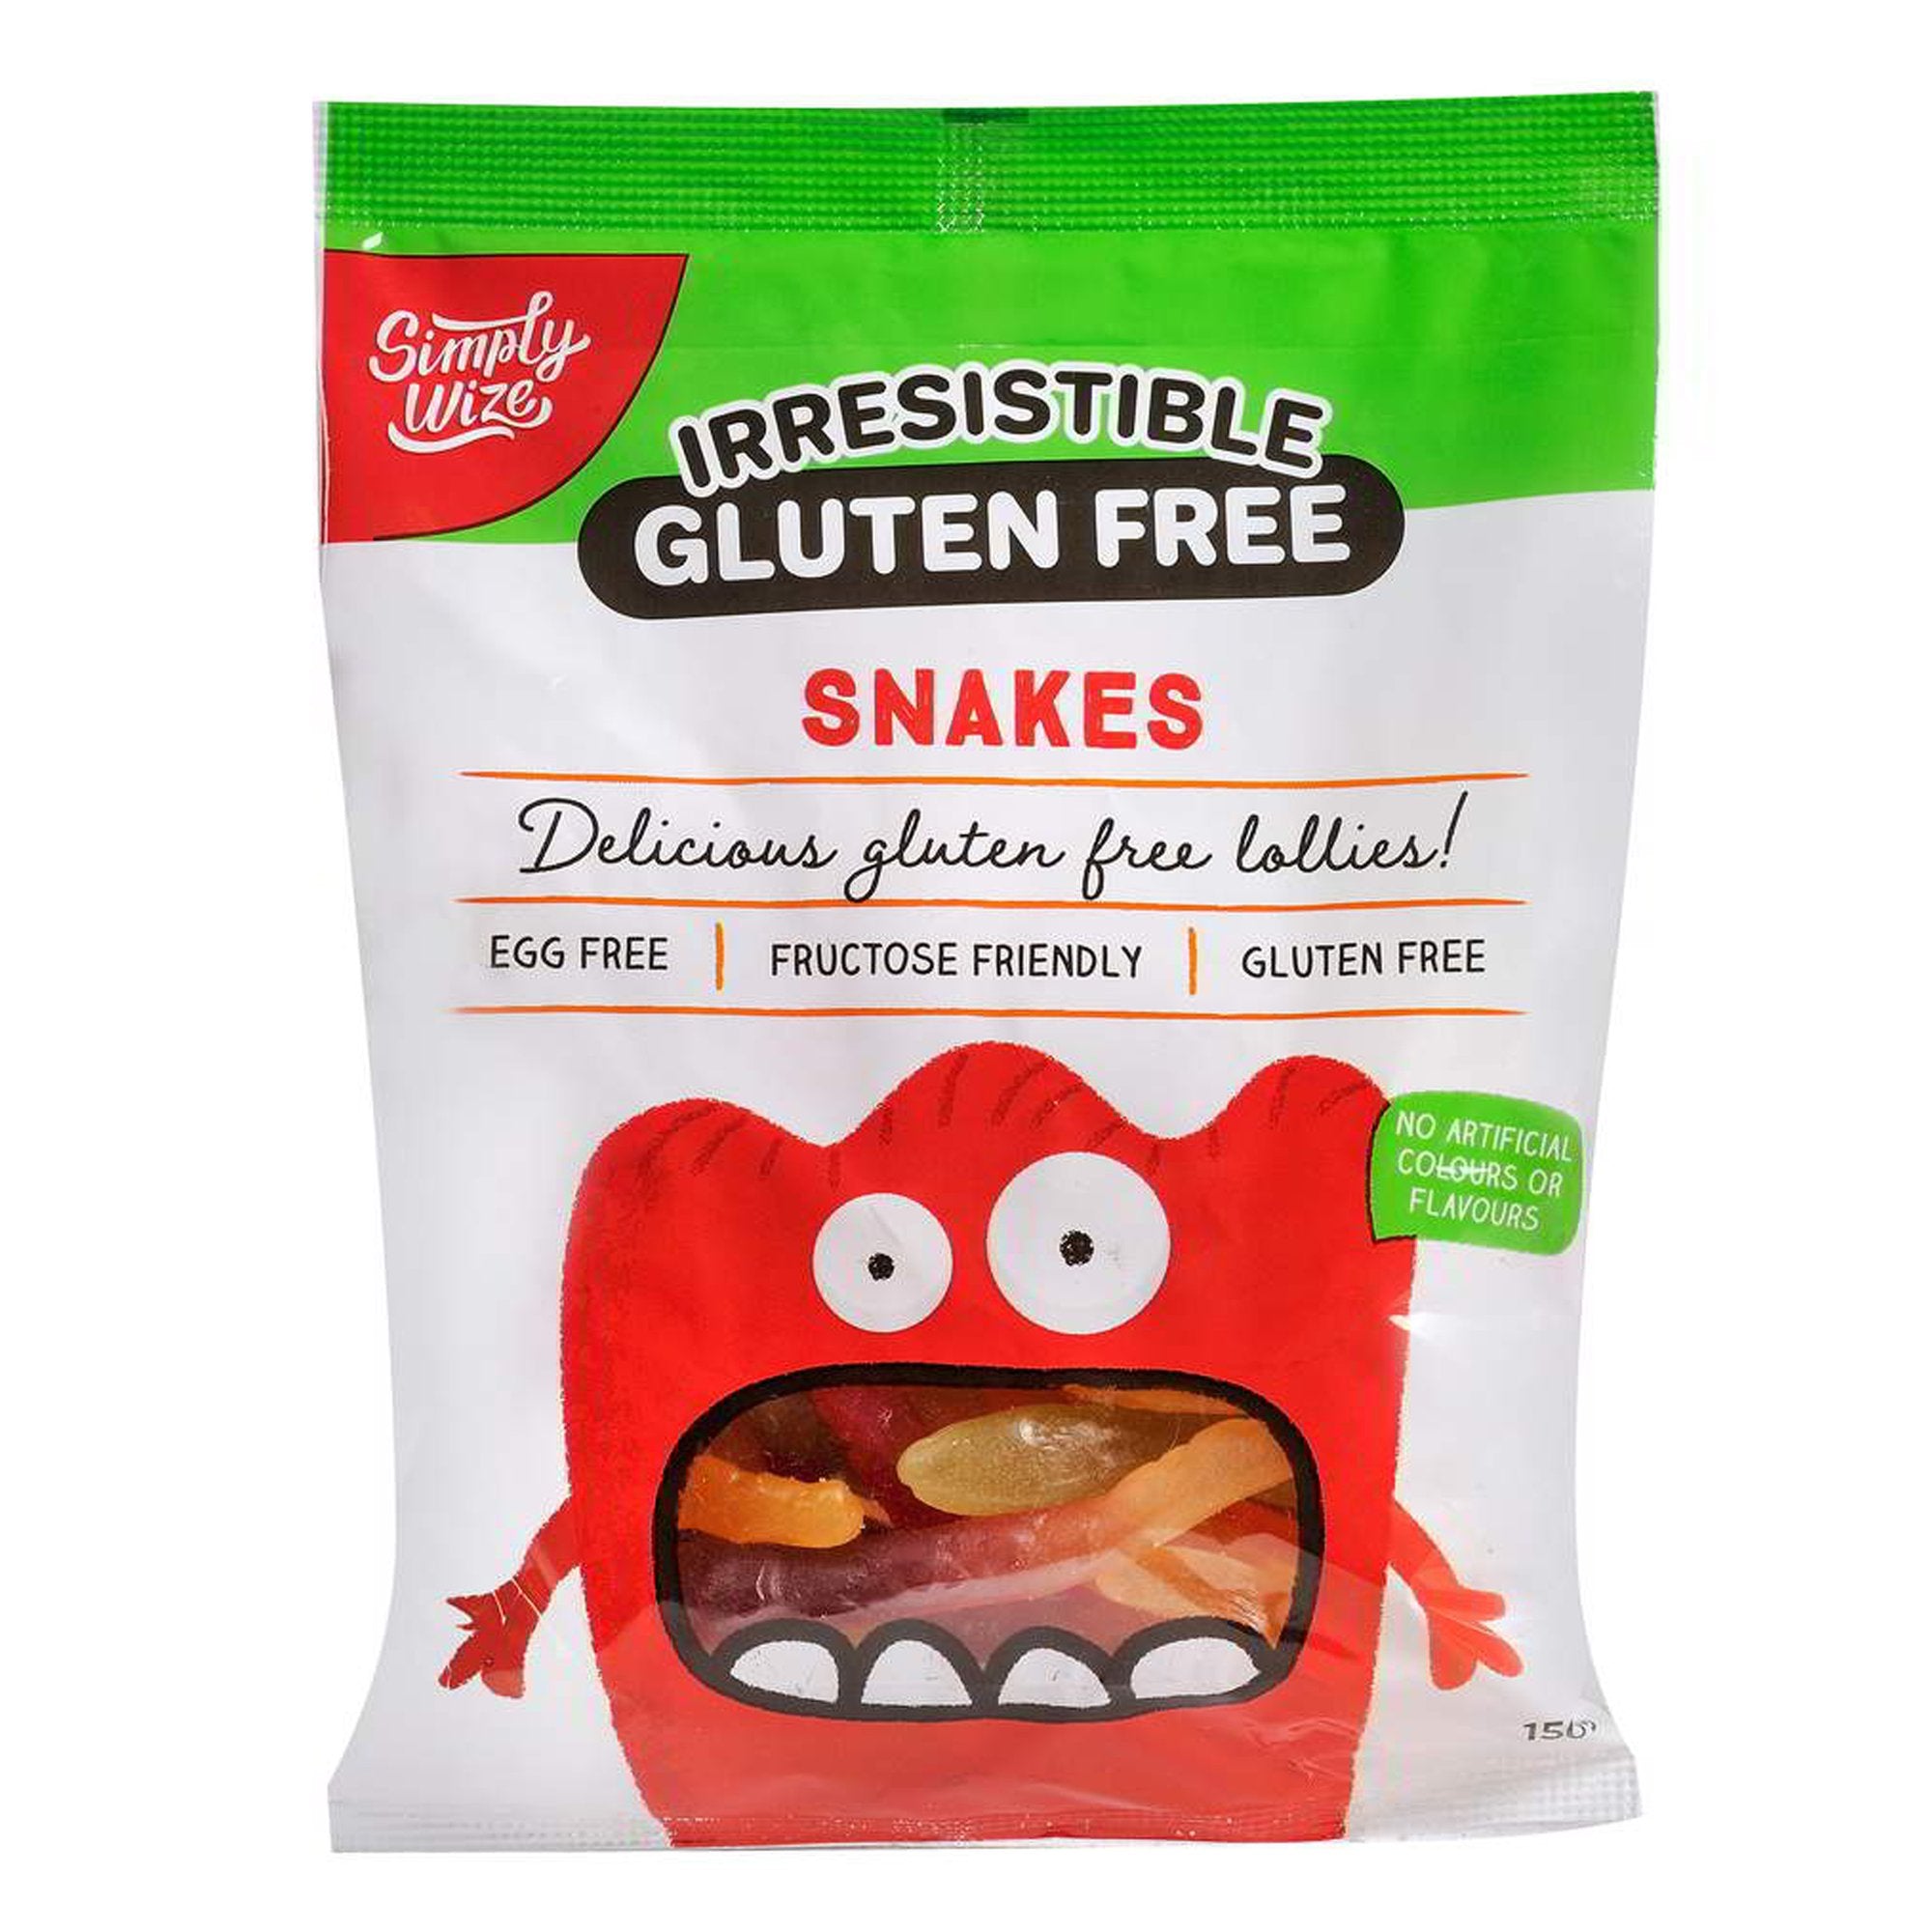 Simply Wize Irresistible Snakes 150g